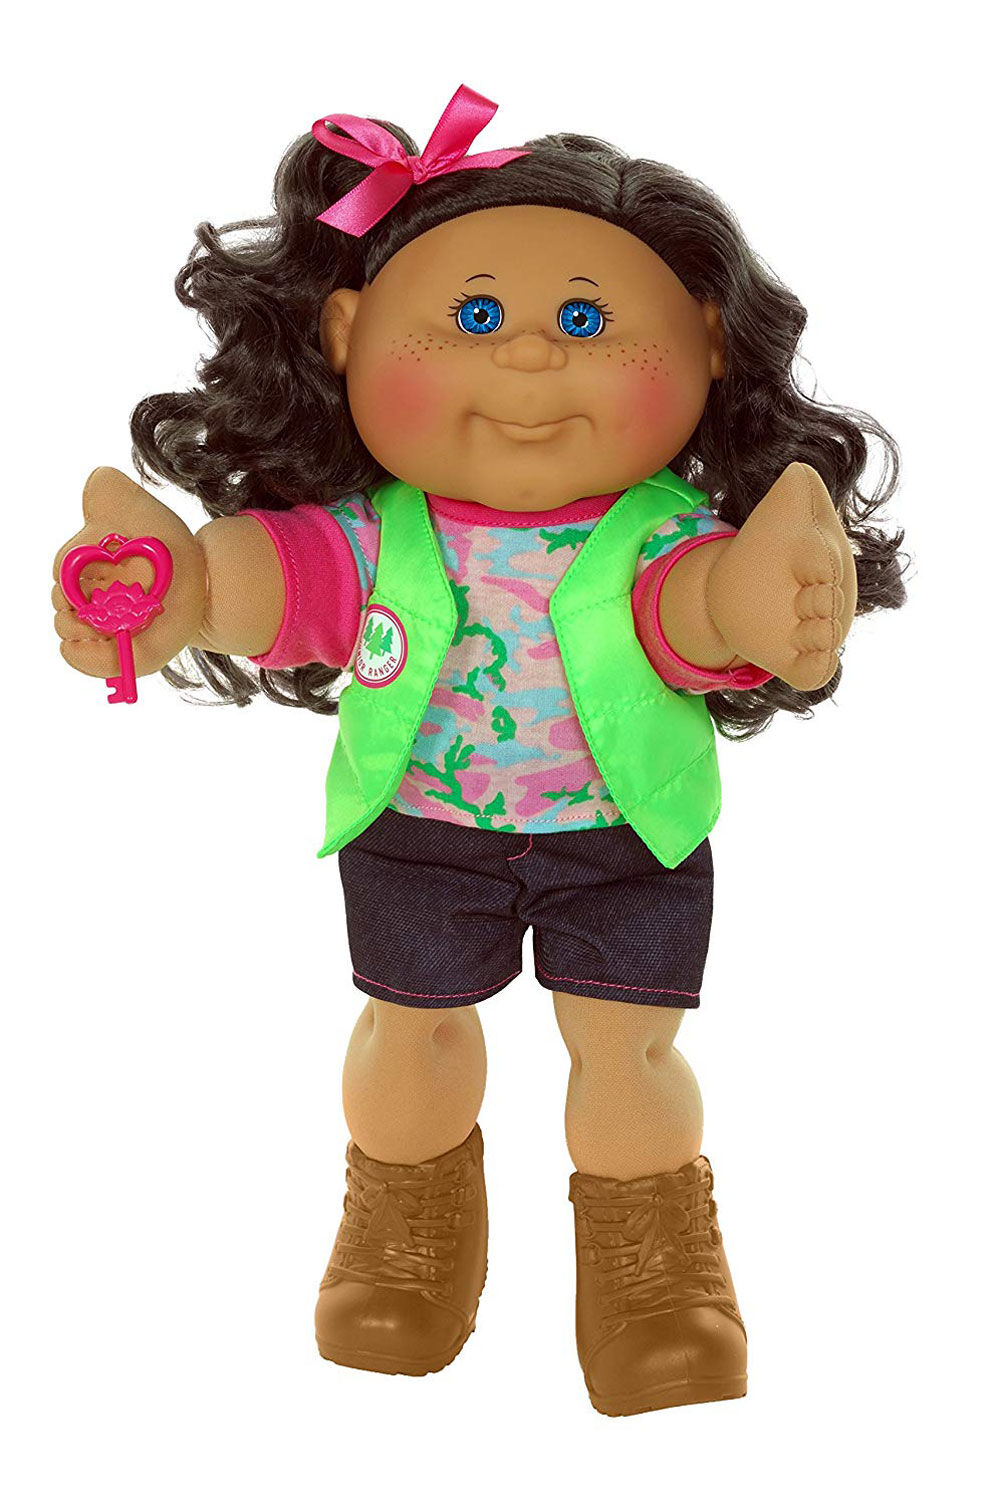 where can i buy a cabbage patch doll